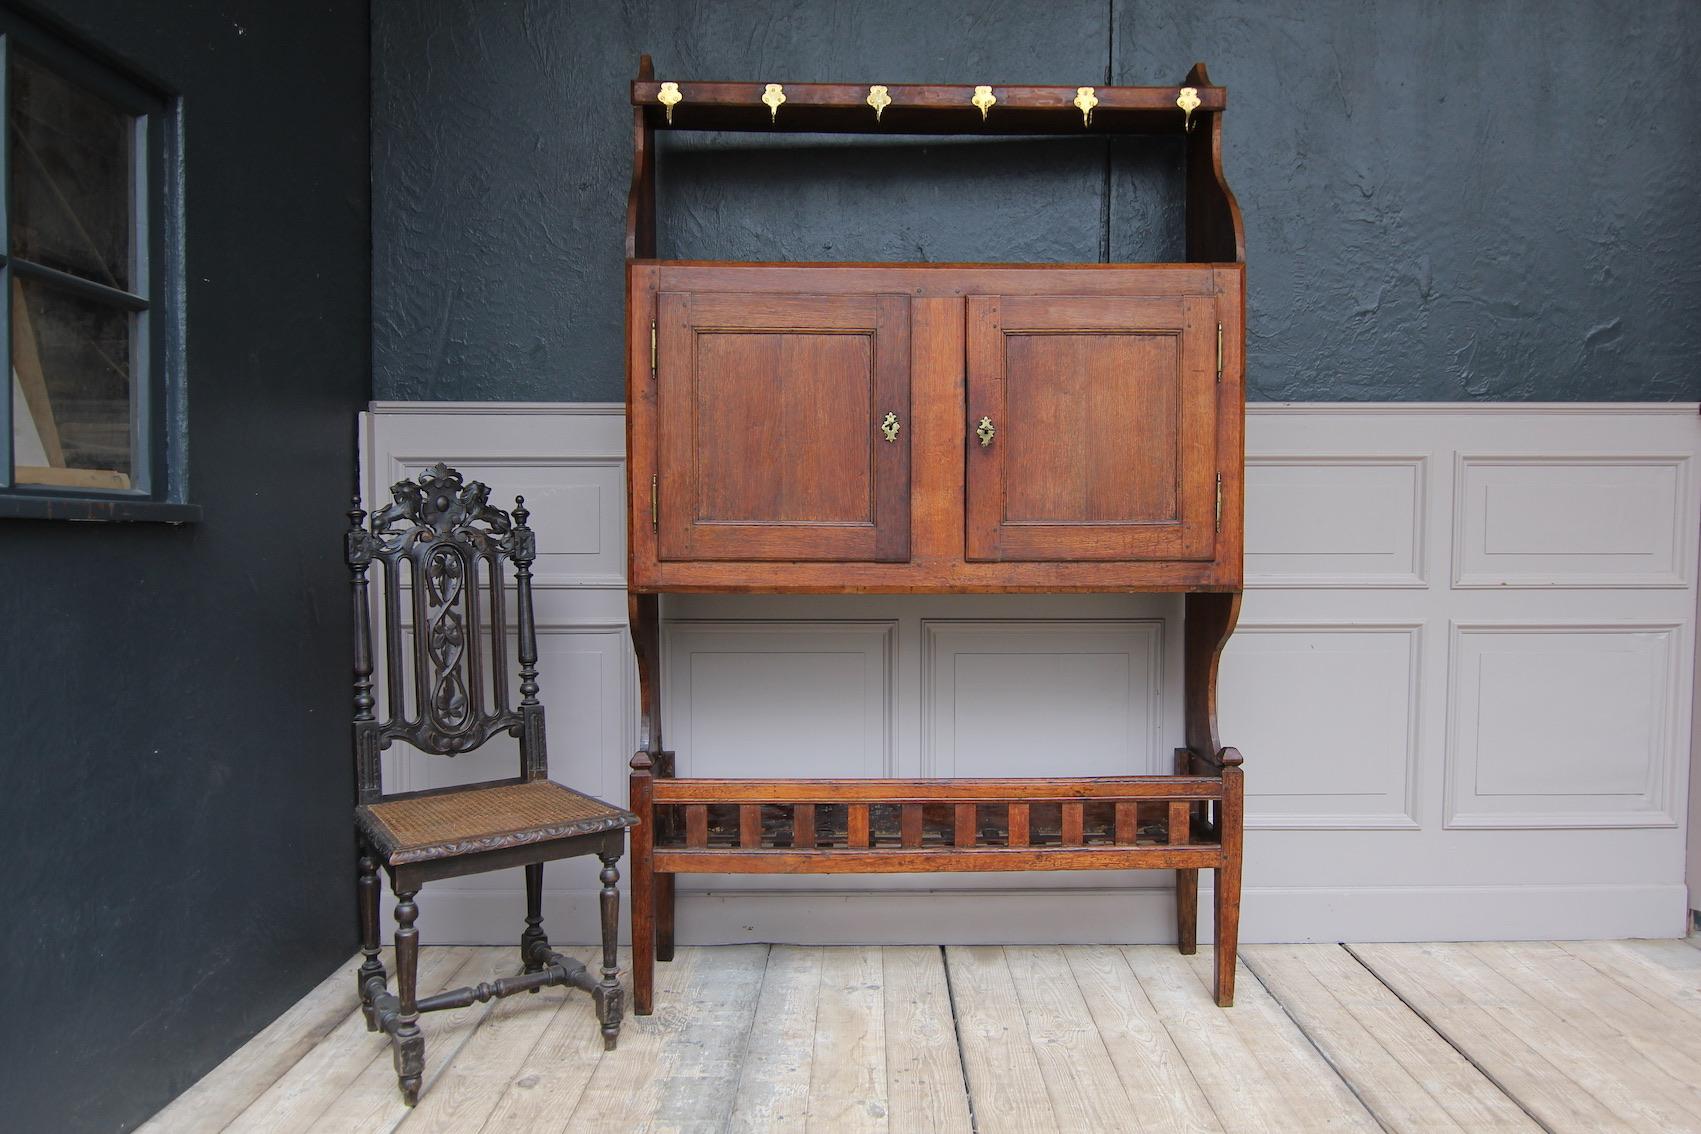 A unique country house pantry cupboard from the 19th century. Made of solid oak.
Later retrofitting or mirroring behind the two doors in the middle part (very heavy as a result).
Shelf with 6 brass hooks.

Dimensions: 
206 cm high / 81.1 inch